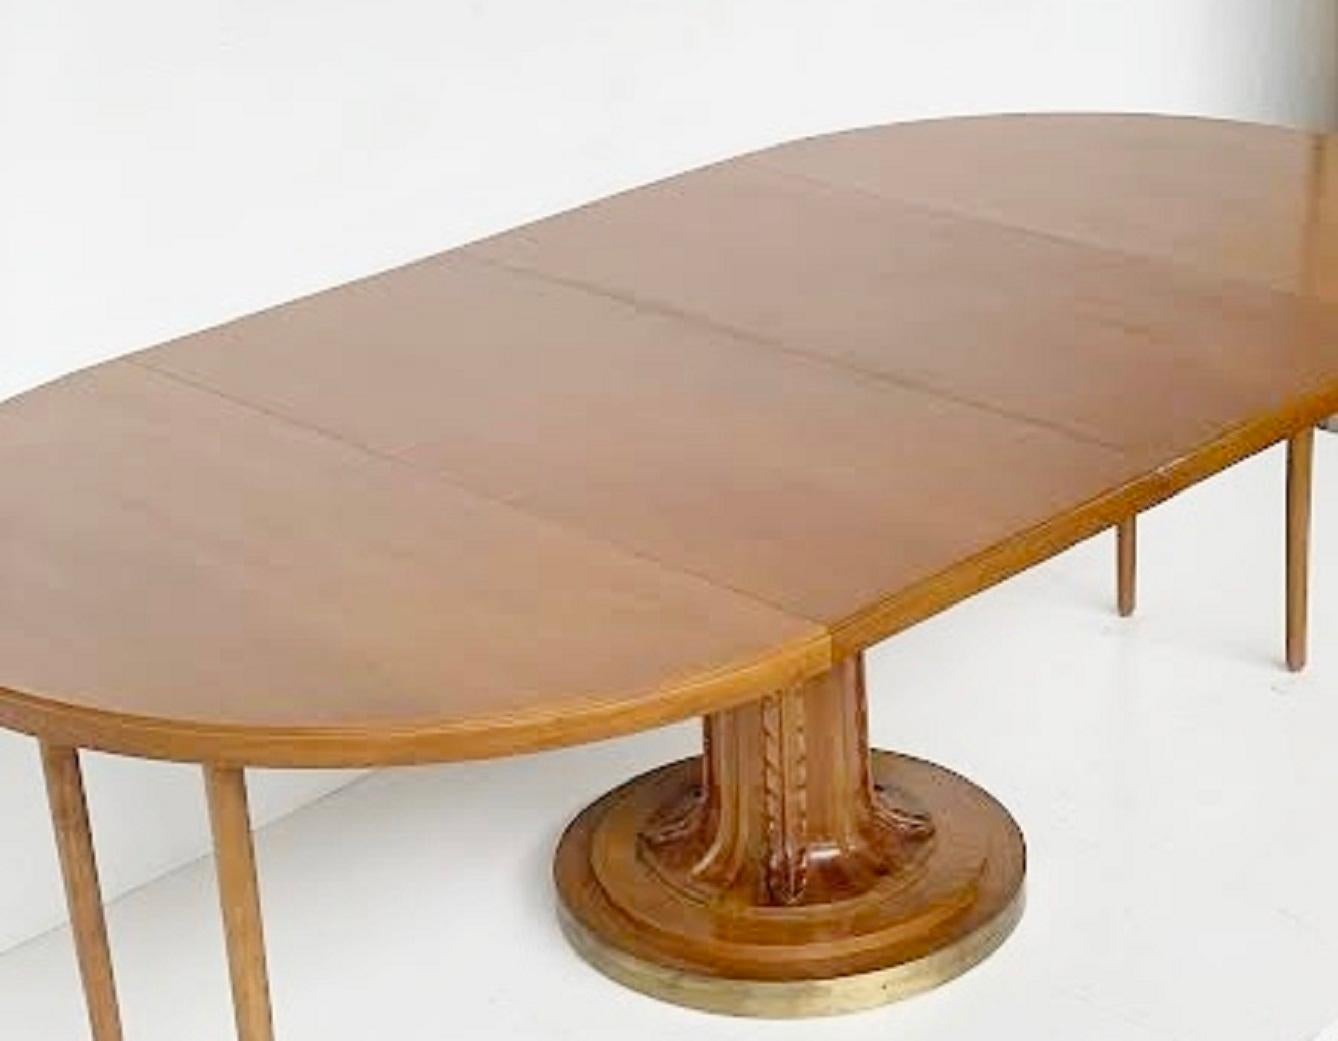 Dining table with 2 extensions by T.H. Robsjohn-Gibbings Klismos for Saridis, Greece, circa 1960s.